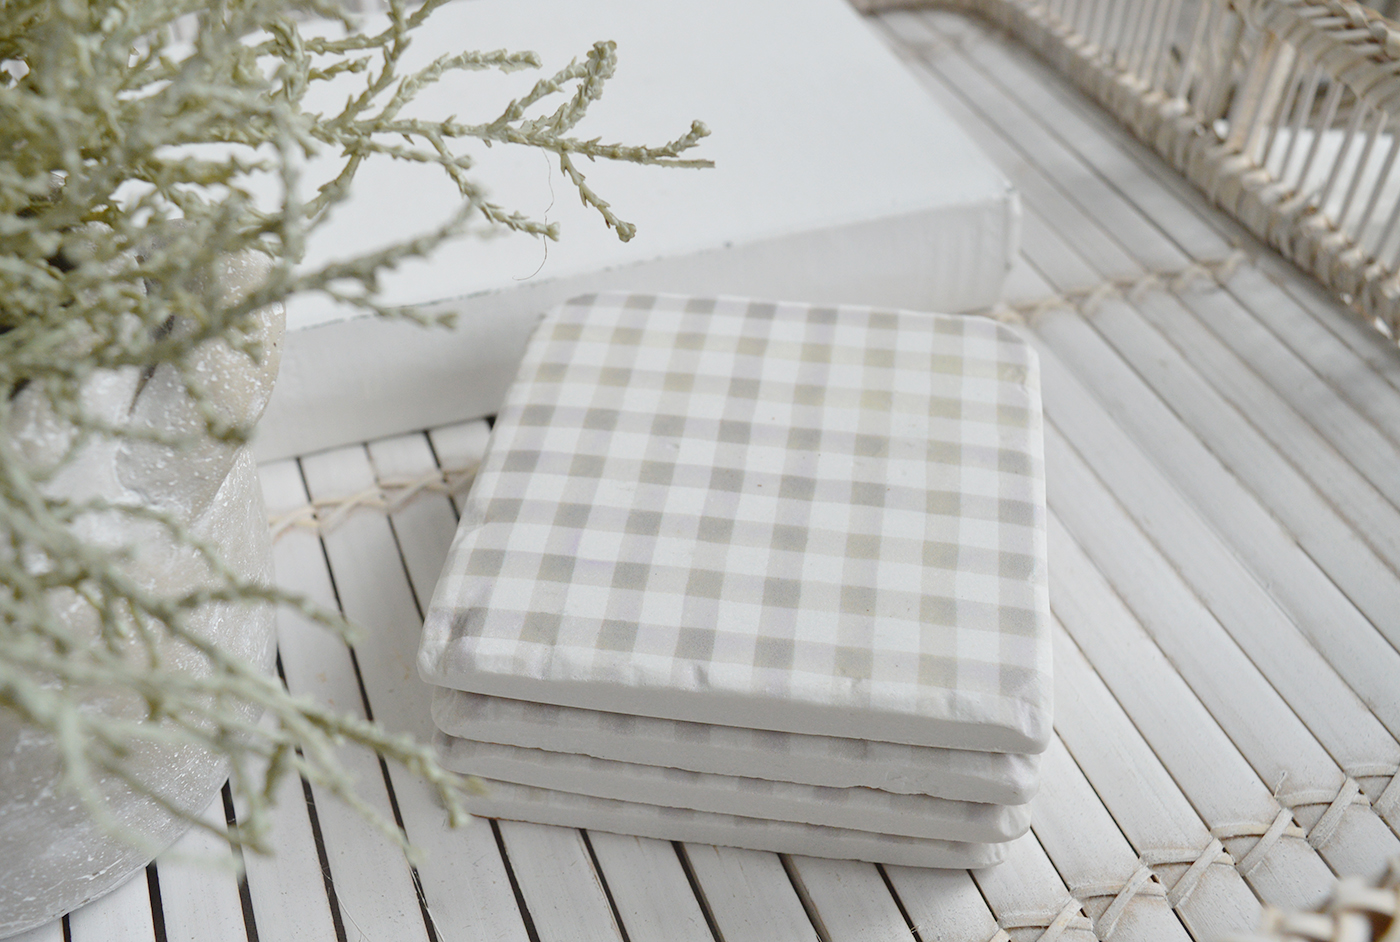 Natural Gingham coasters - New England modern farmhouse, country and coastal furniture, home decor and interiorsv